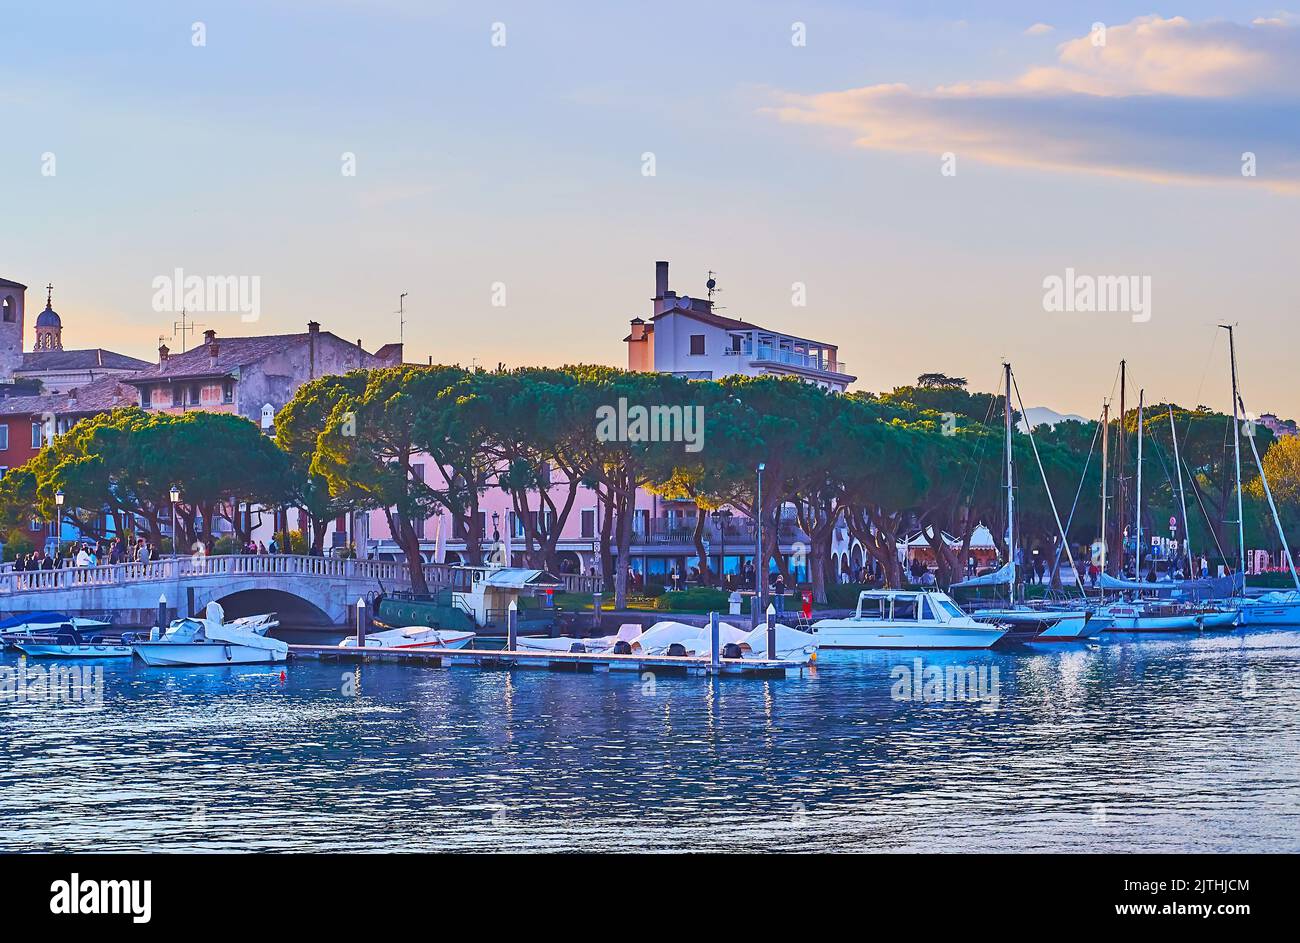 The tall spread pines along the bank of Lake Garda with yachts in port, Desenzano del Garda, Lombardy, Italy Stock Photo